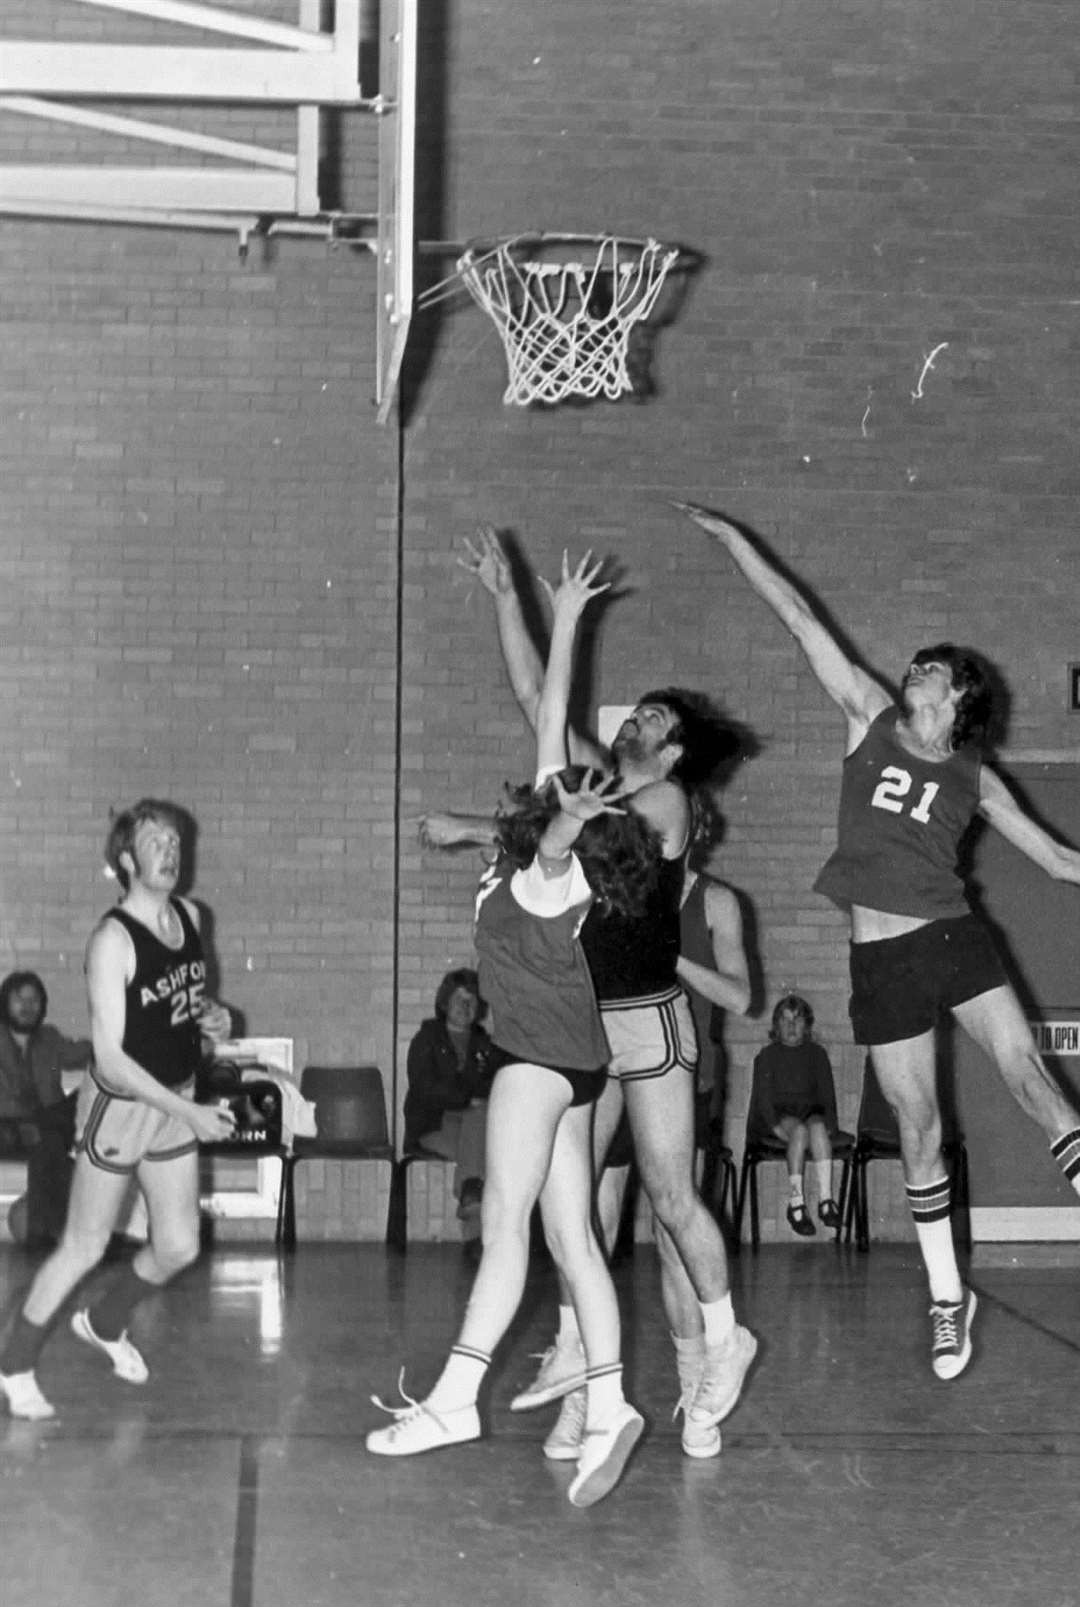 Mixed Basketball Match at the Stour Centre in Ashford in 1970